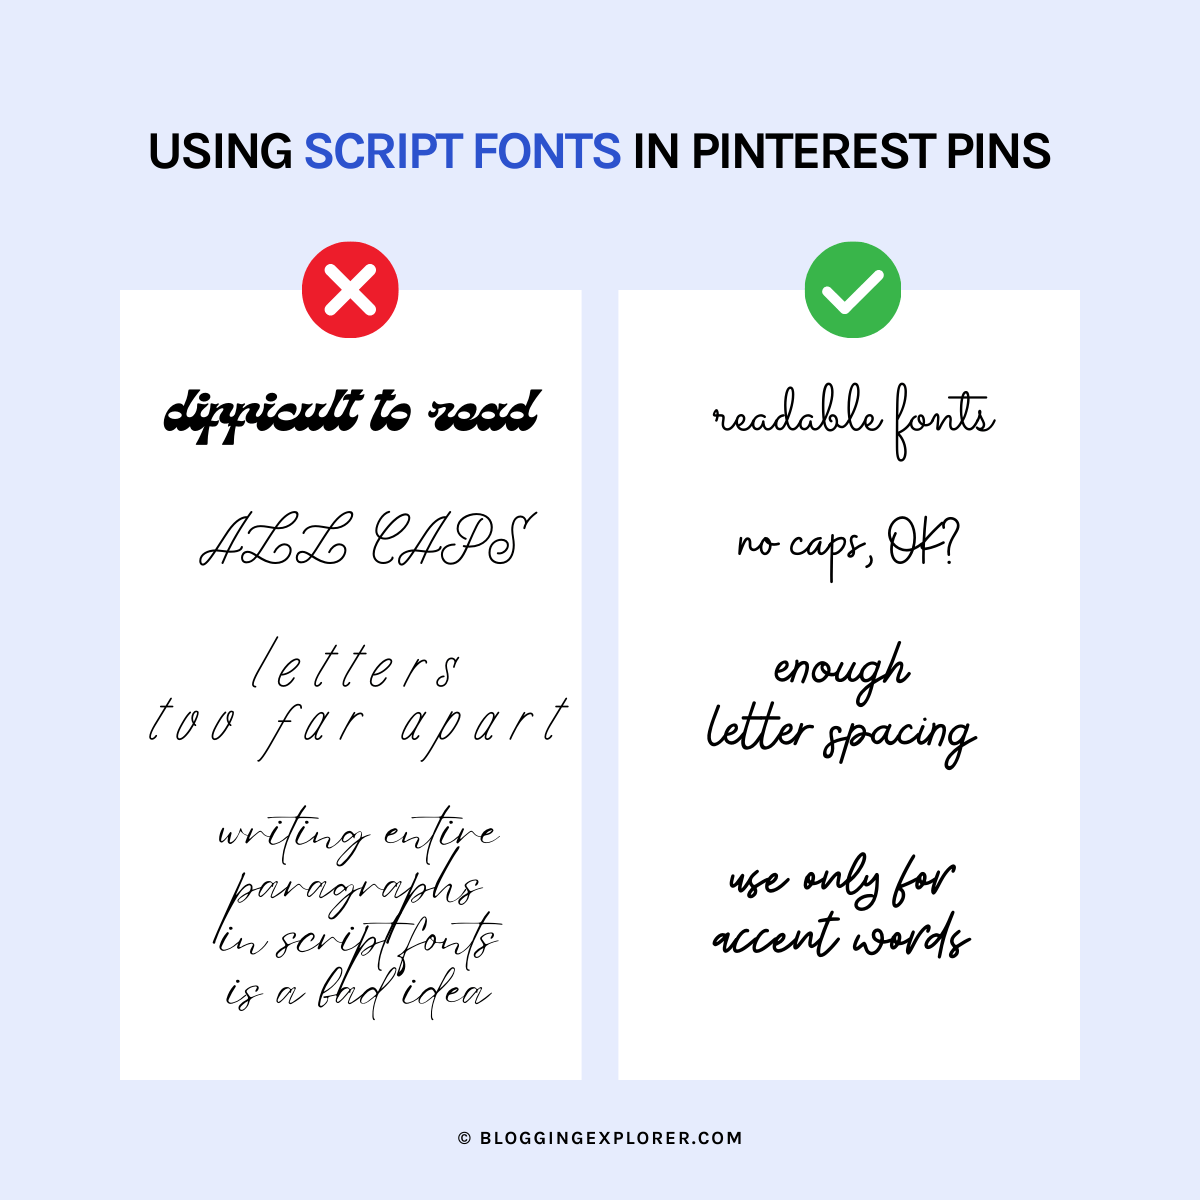 How to use script fonts in Pinterest pins correctly